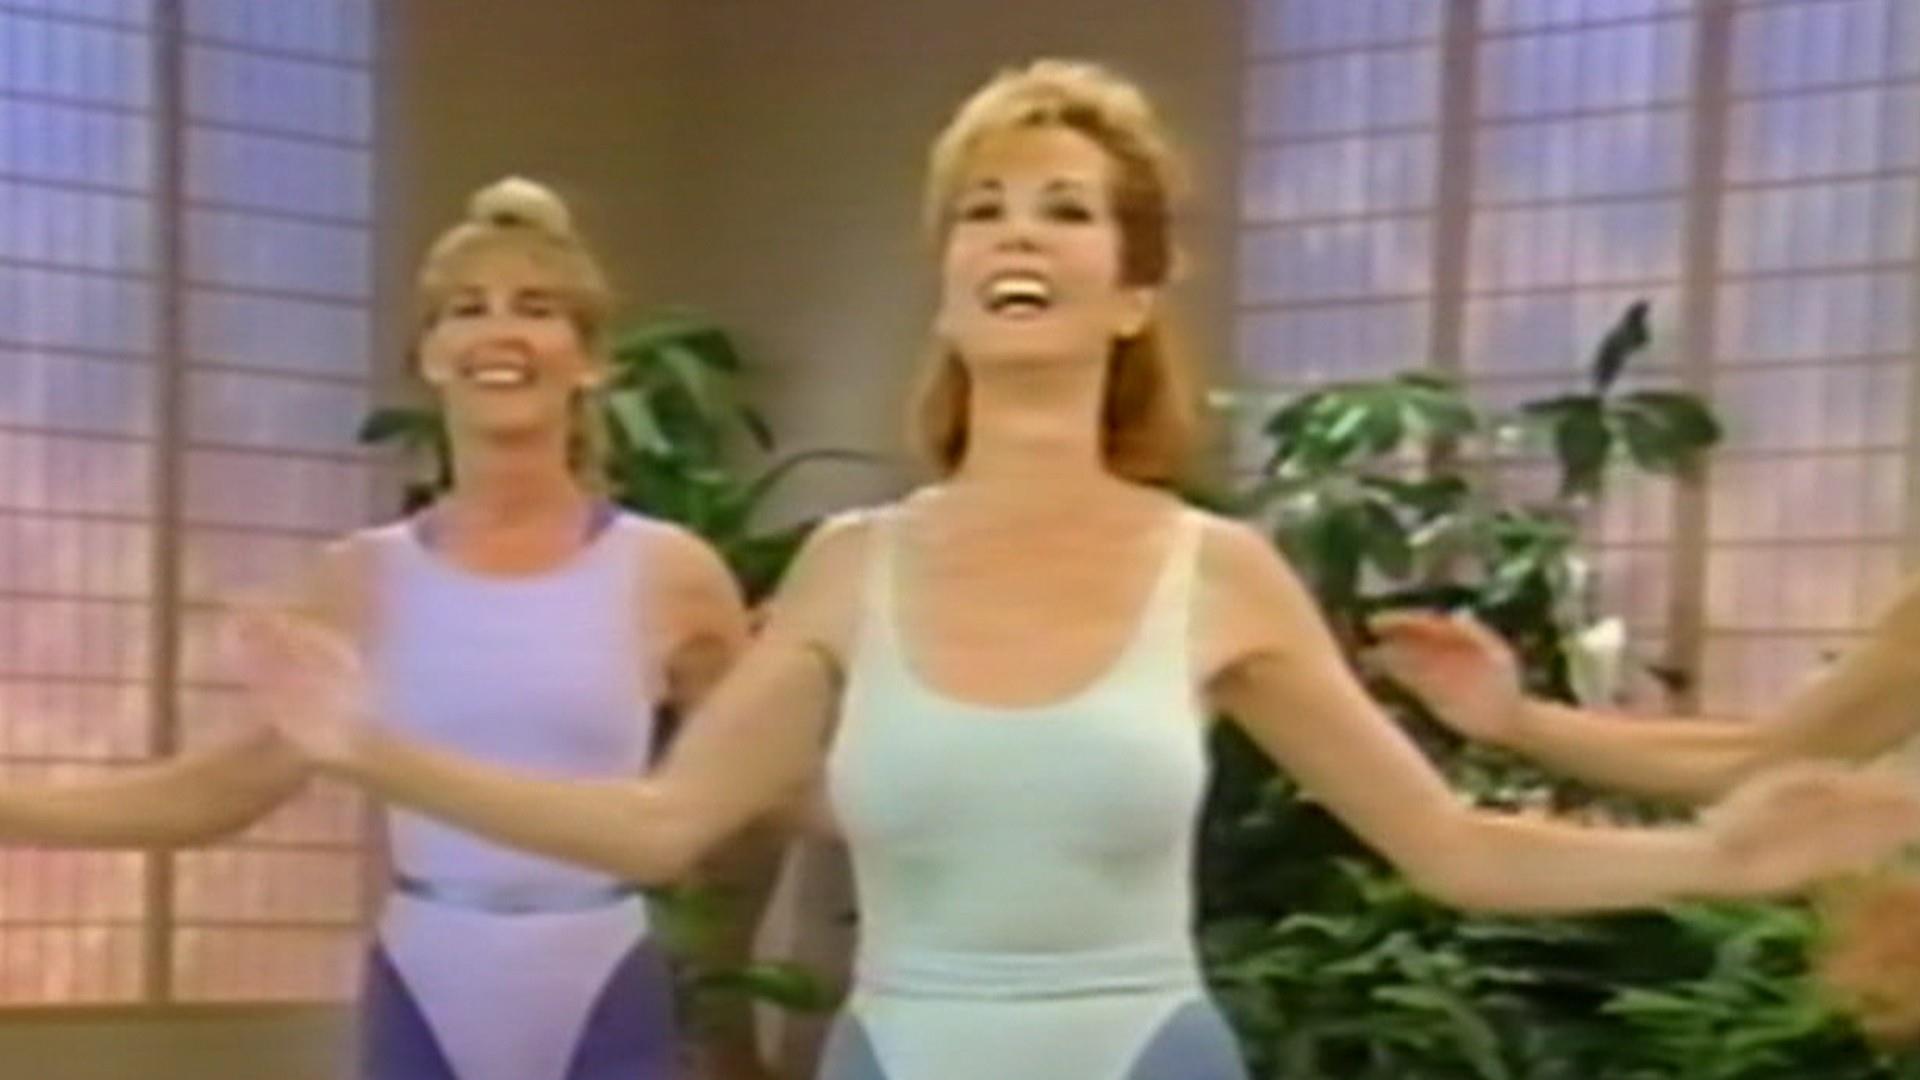 Flashback! See clips from Kathie Lee's workout videos